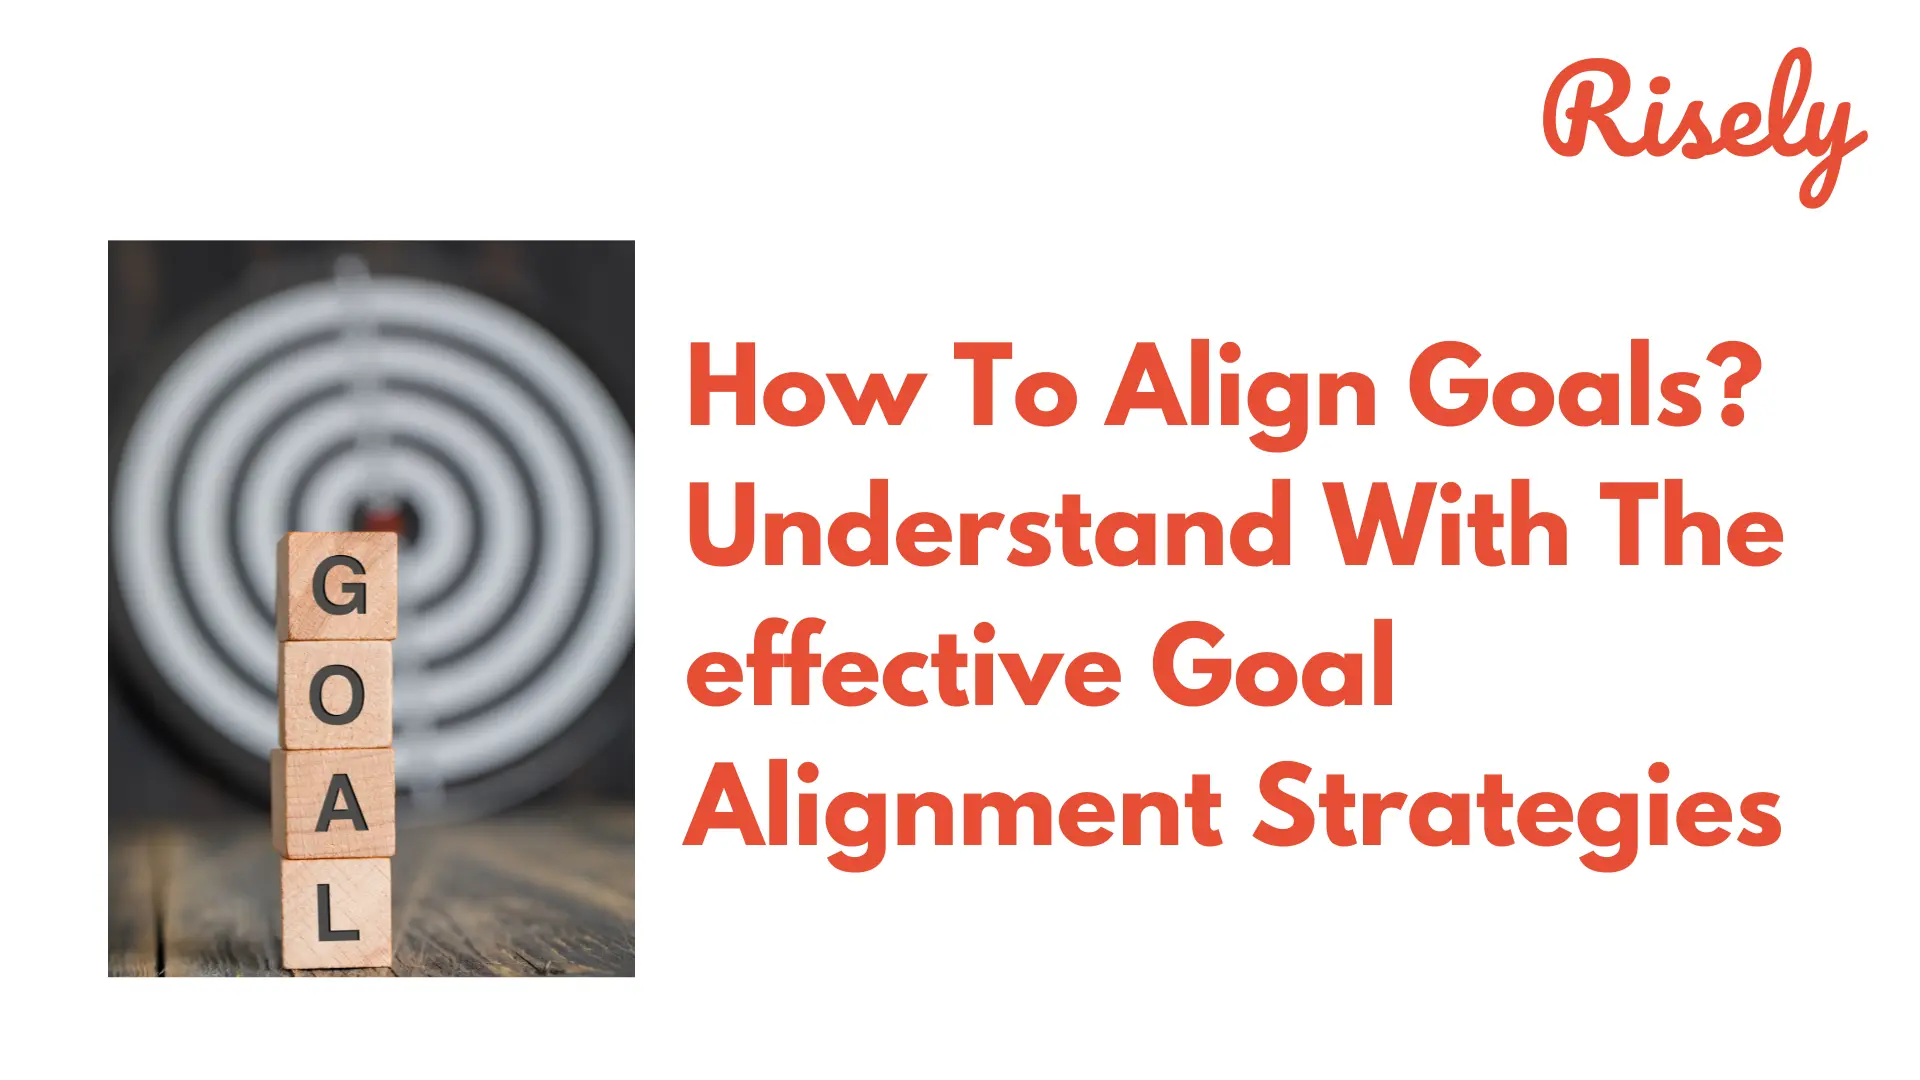 How To Align Goals? Understand With The effective Goal Alignment Strategies